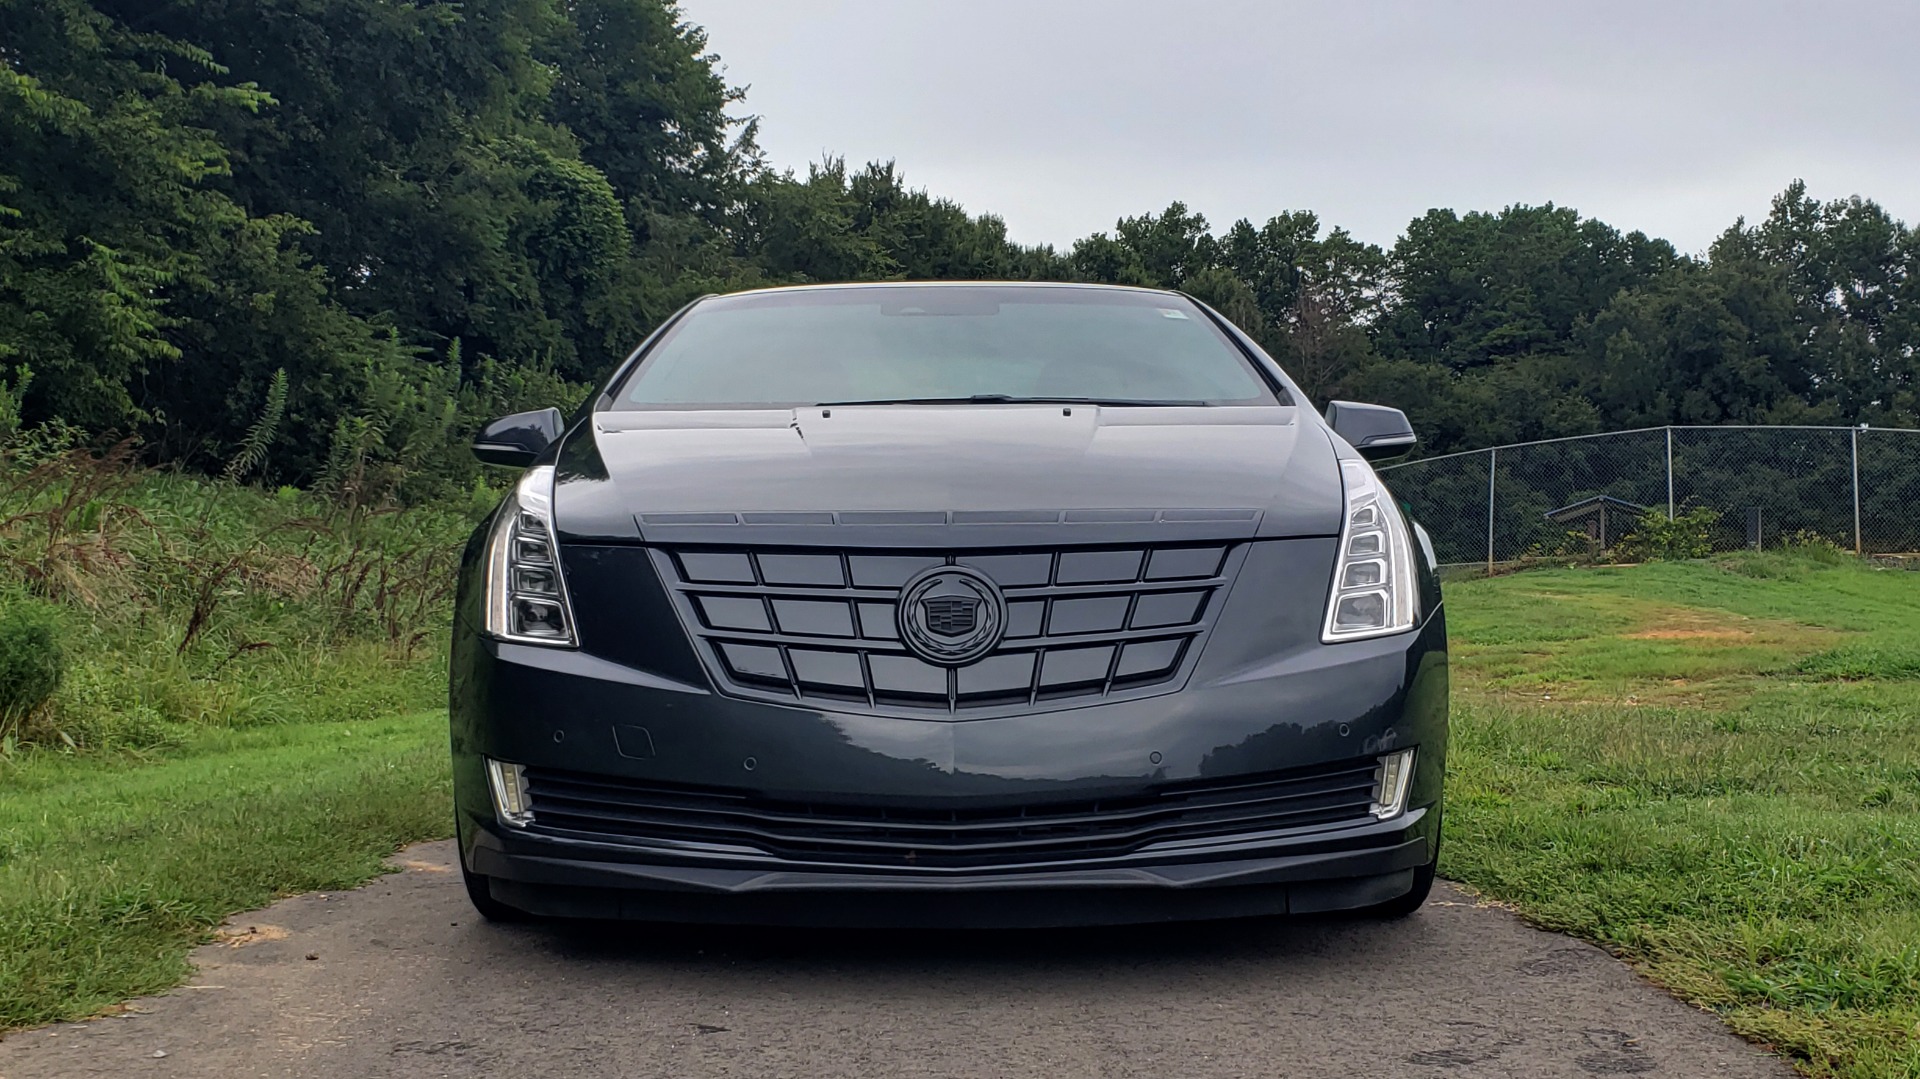 Used 2014 Cadillac ELR 2DR COUPE / HYBRID / NAV / BOSE / HEATED SEATS / REARVIEW for sale Sold at Formula Imports in Charlotte NC 28227 11